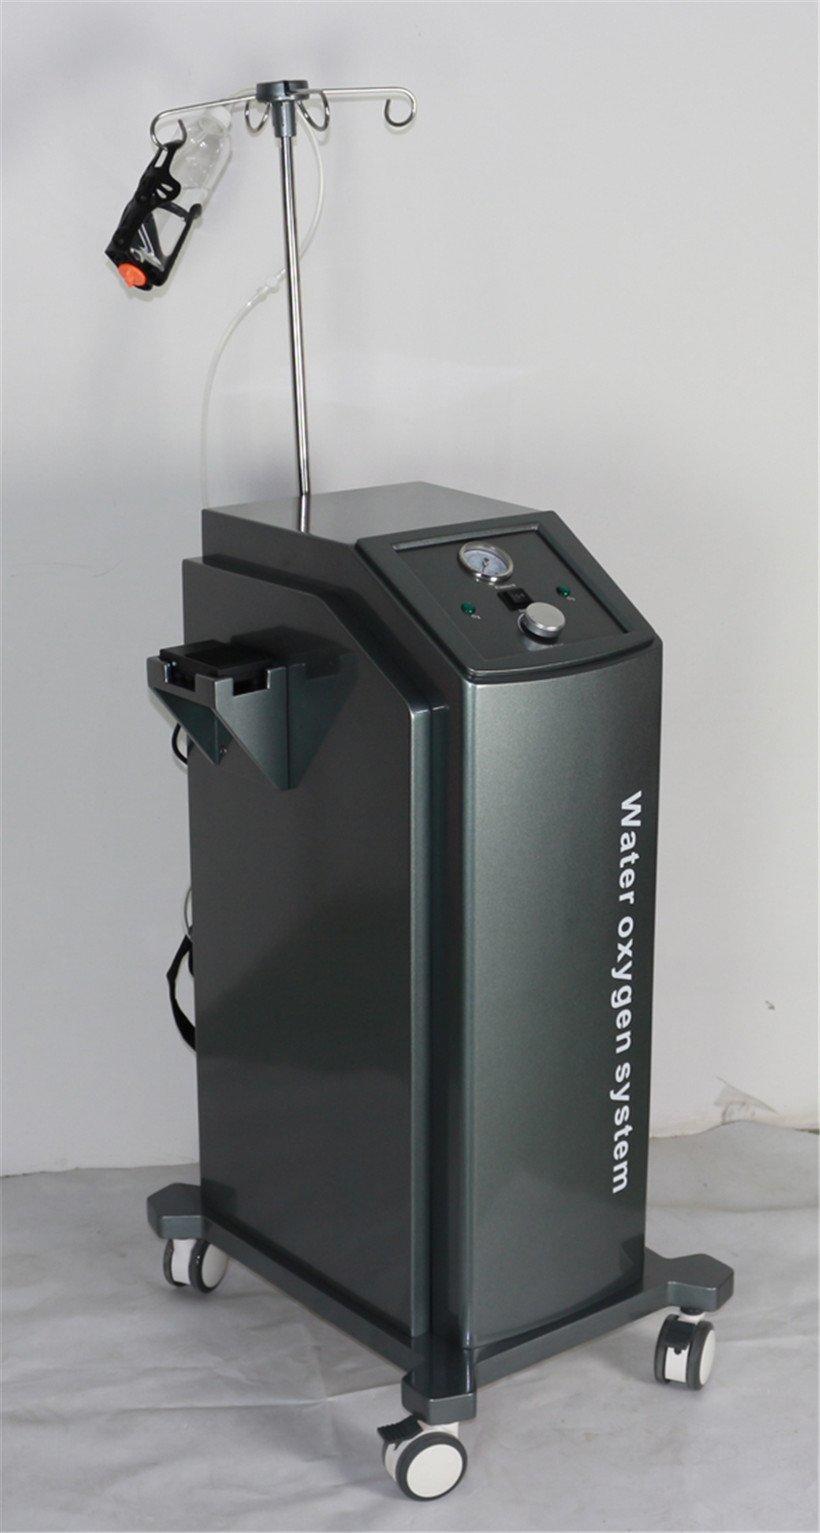 Tingmay jet buy oxygen machine online directly sale for body-3